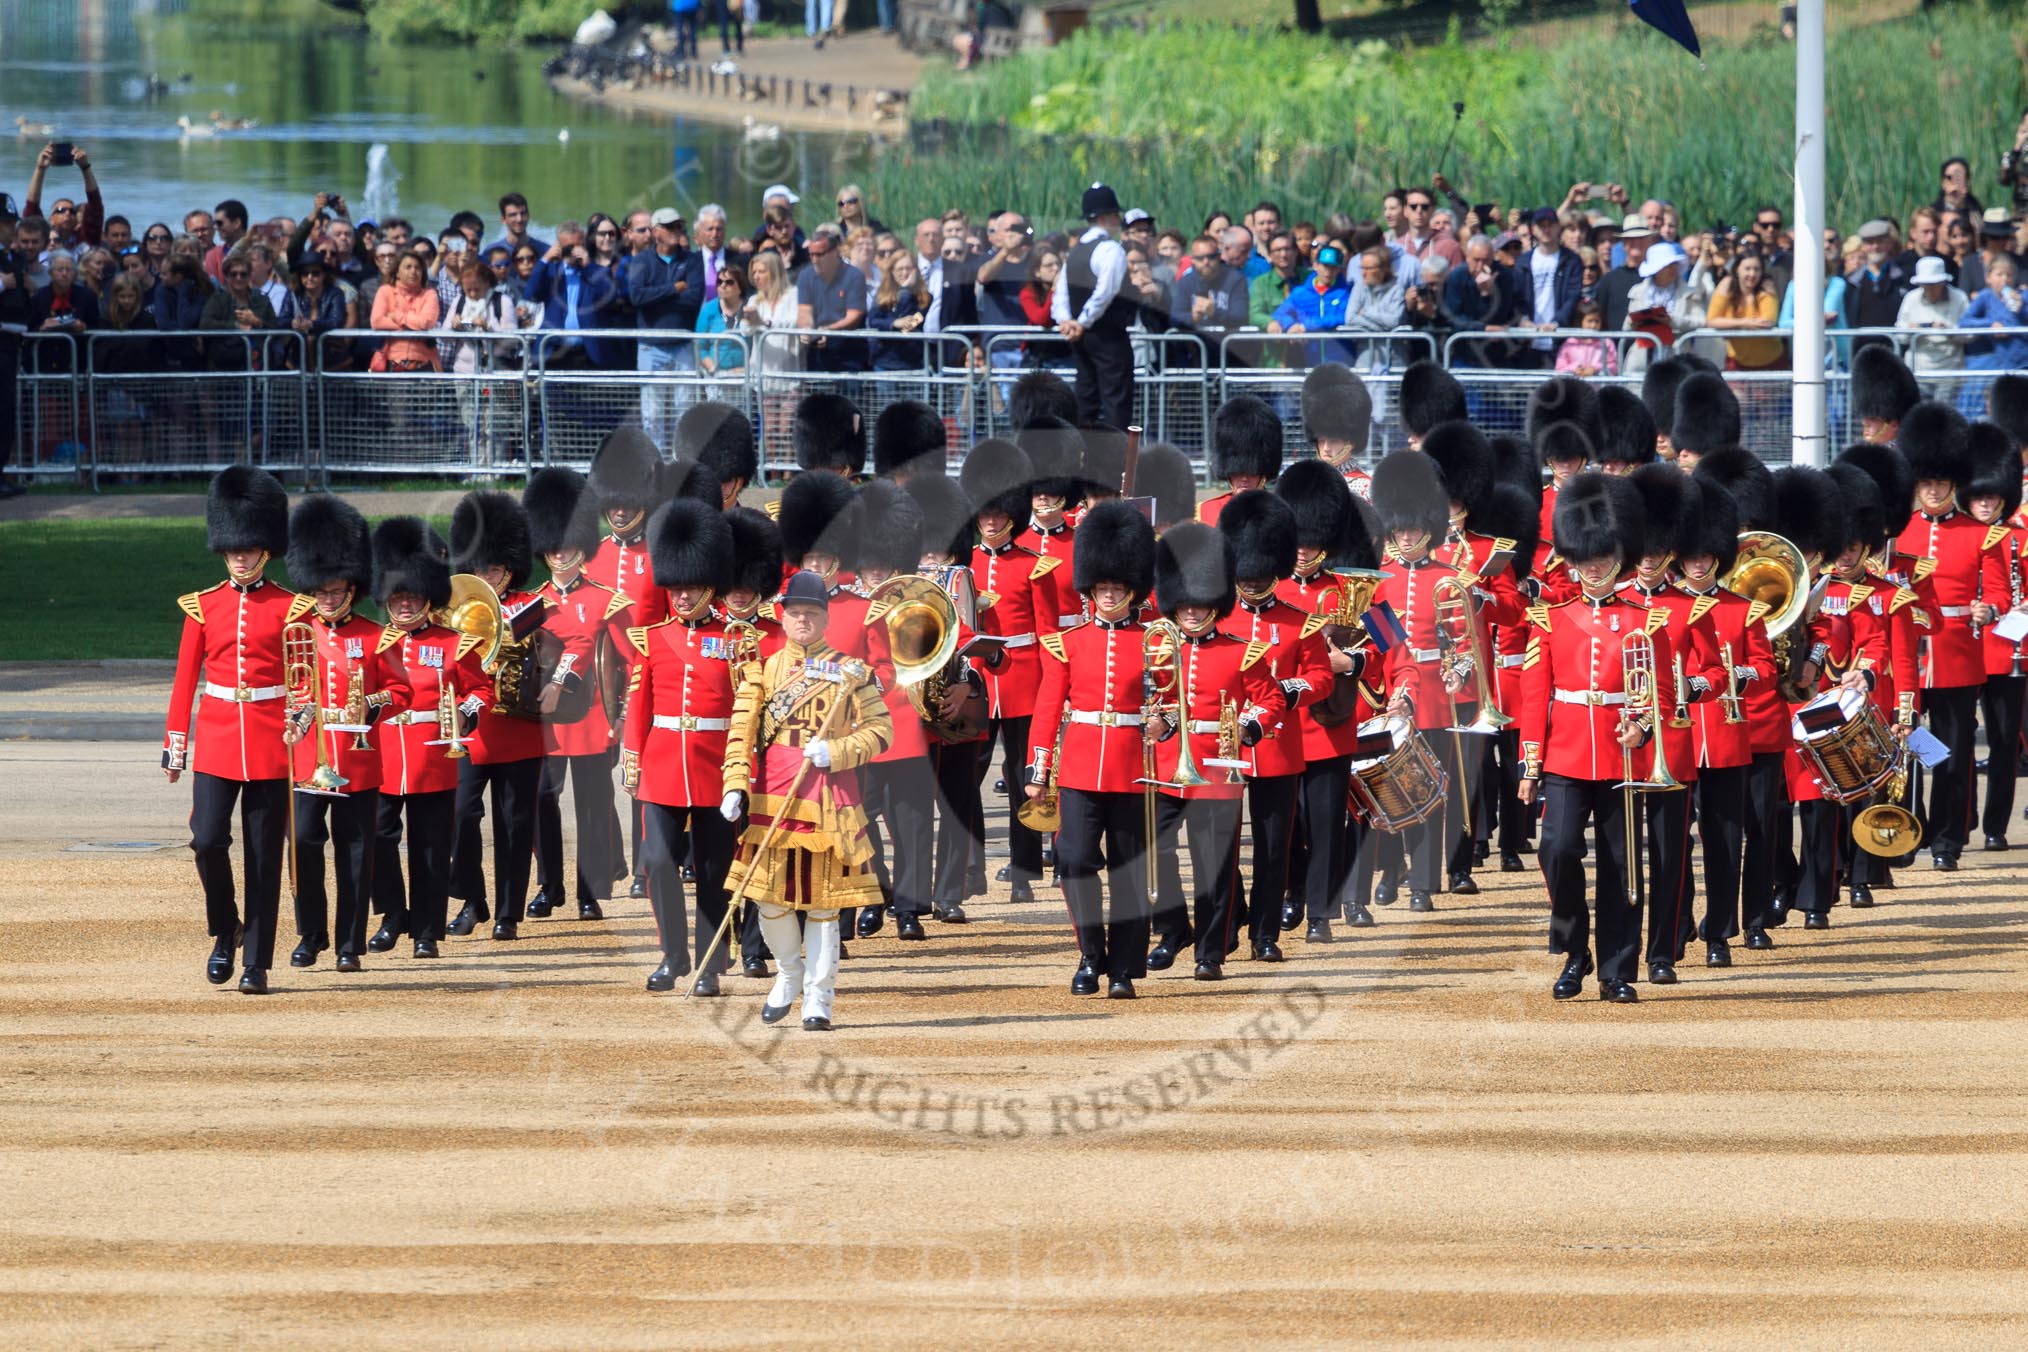 The Band of the Grenadier Guards, led by Drum Major Stephen Staite, Grenadier Guards, during Trooping the Colour 2018, The Queen's Birthday Parade at Horse Guards Parade, Westminster, London, 9 June 2018, 10:26.